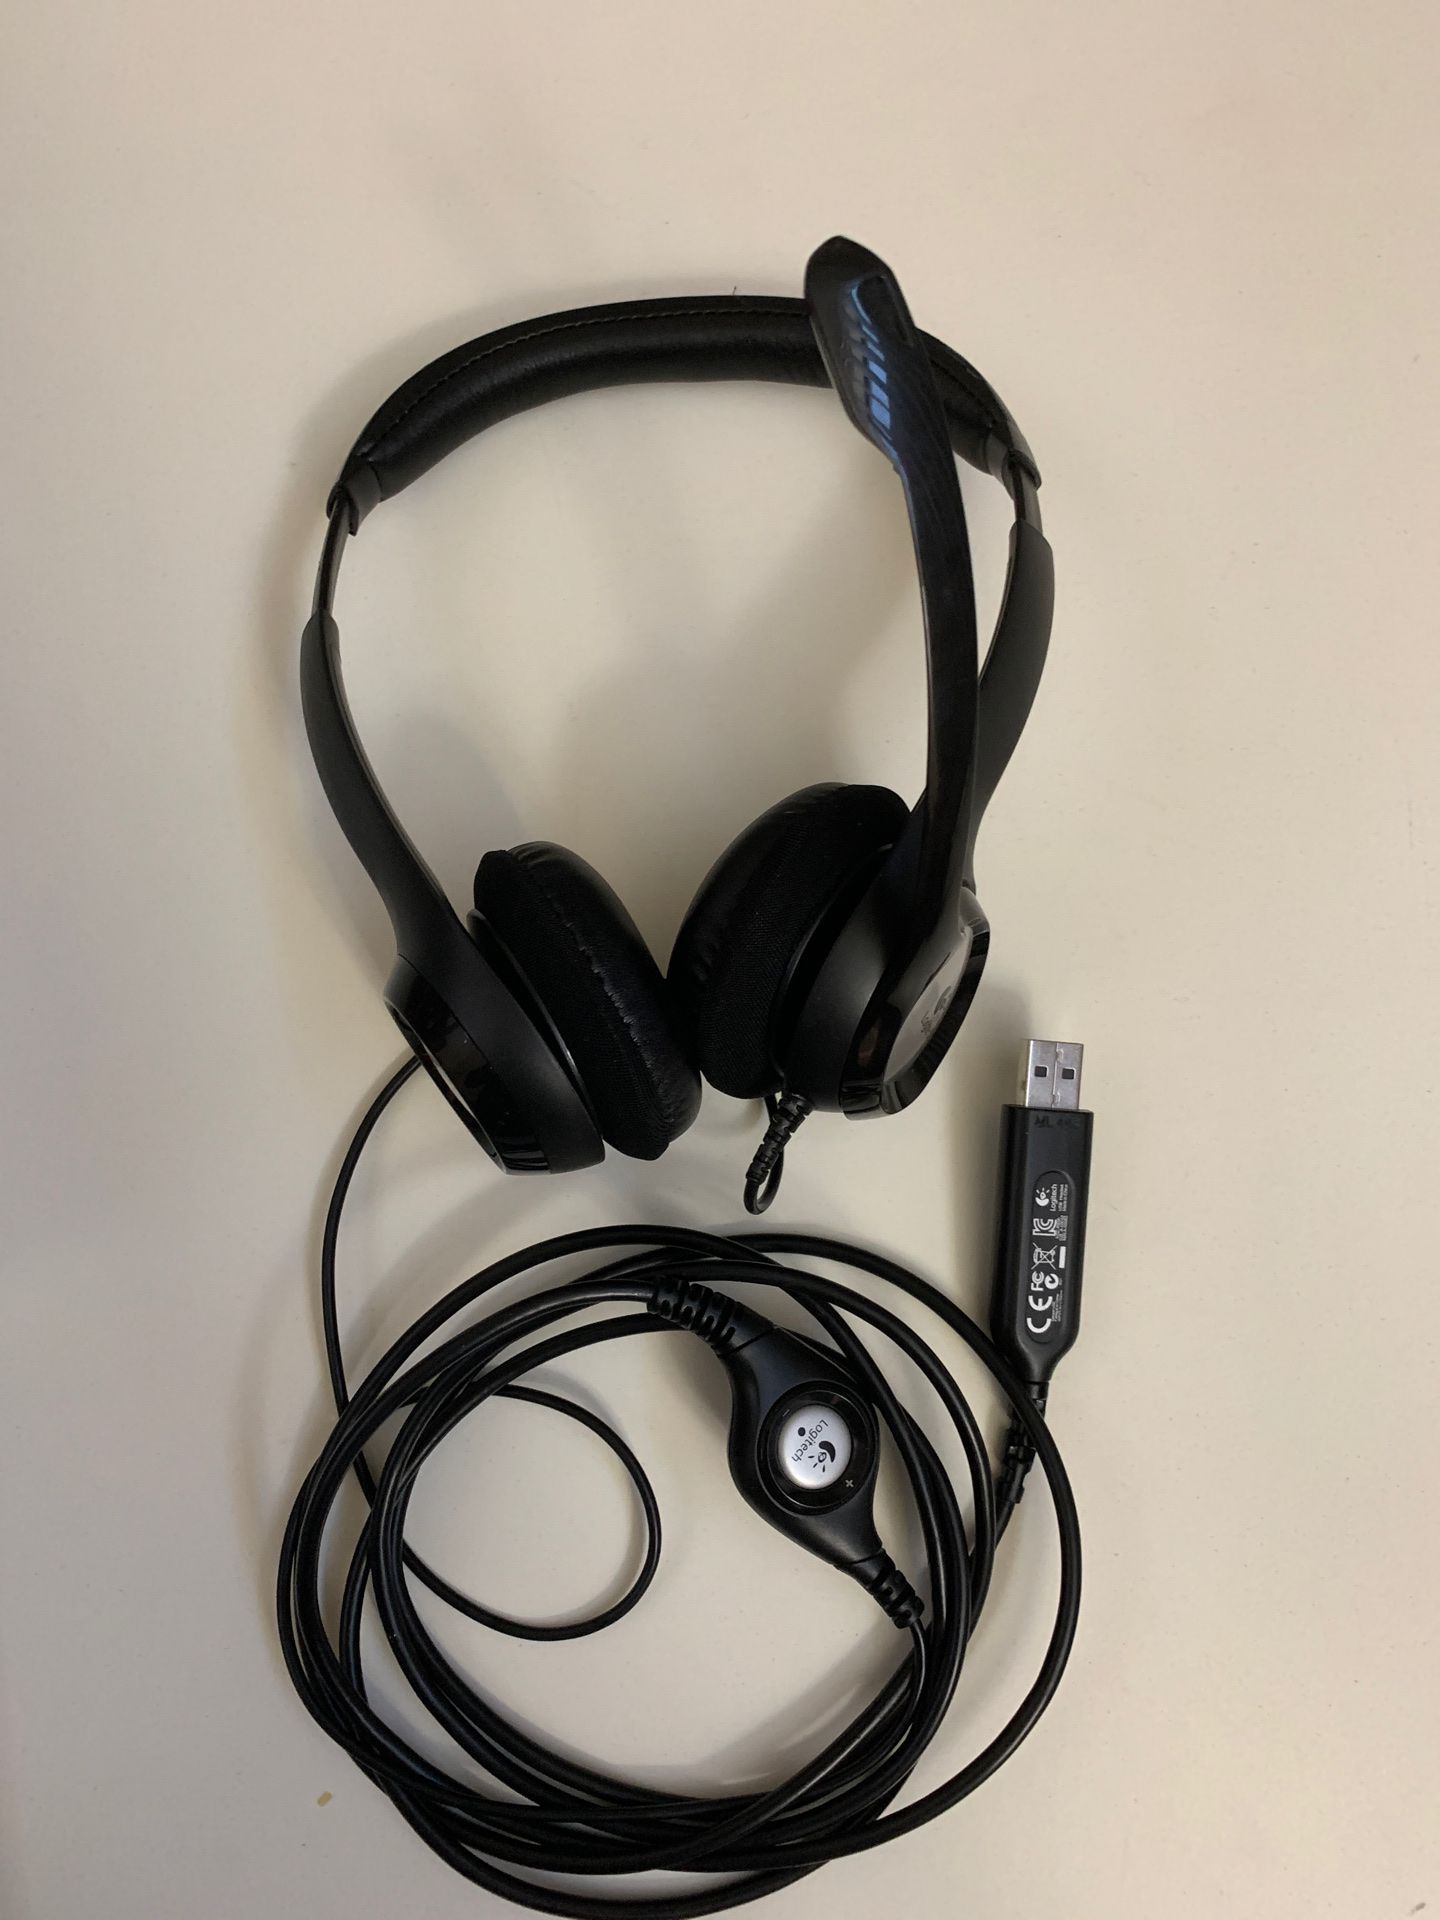 Logitech chat USB headset - headphone with microphone with mute